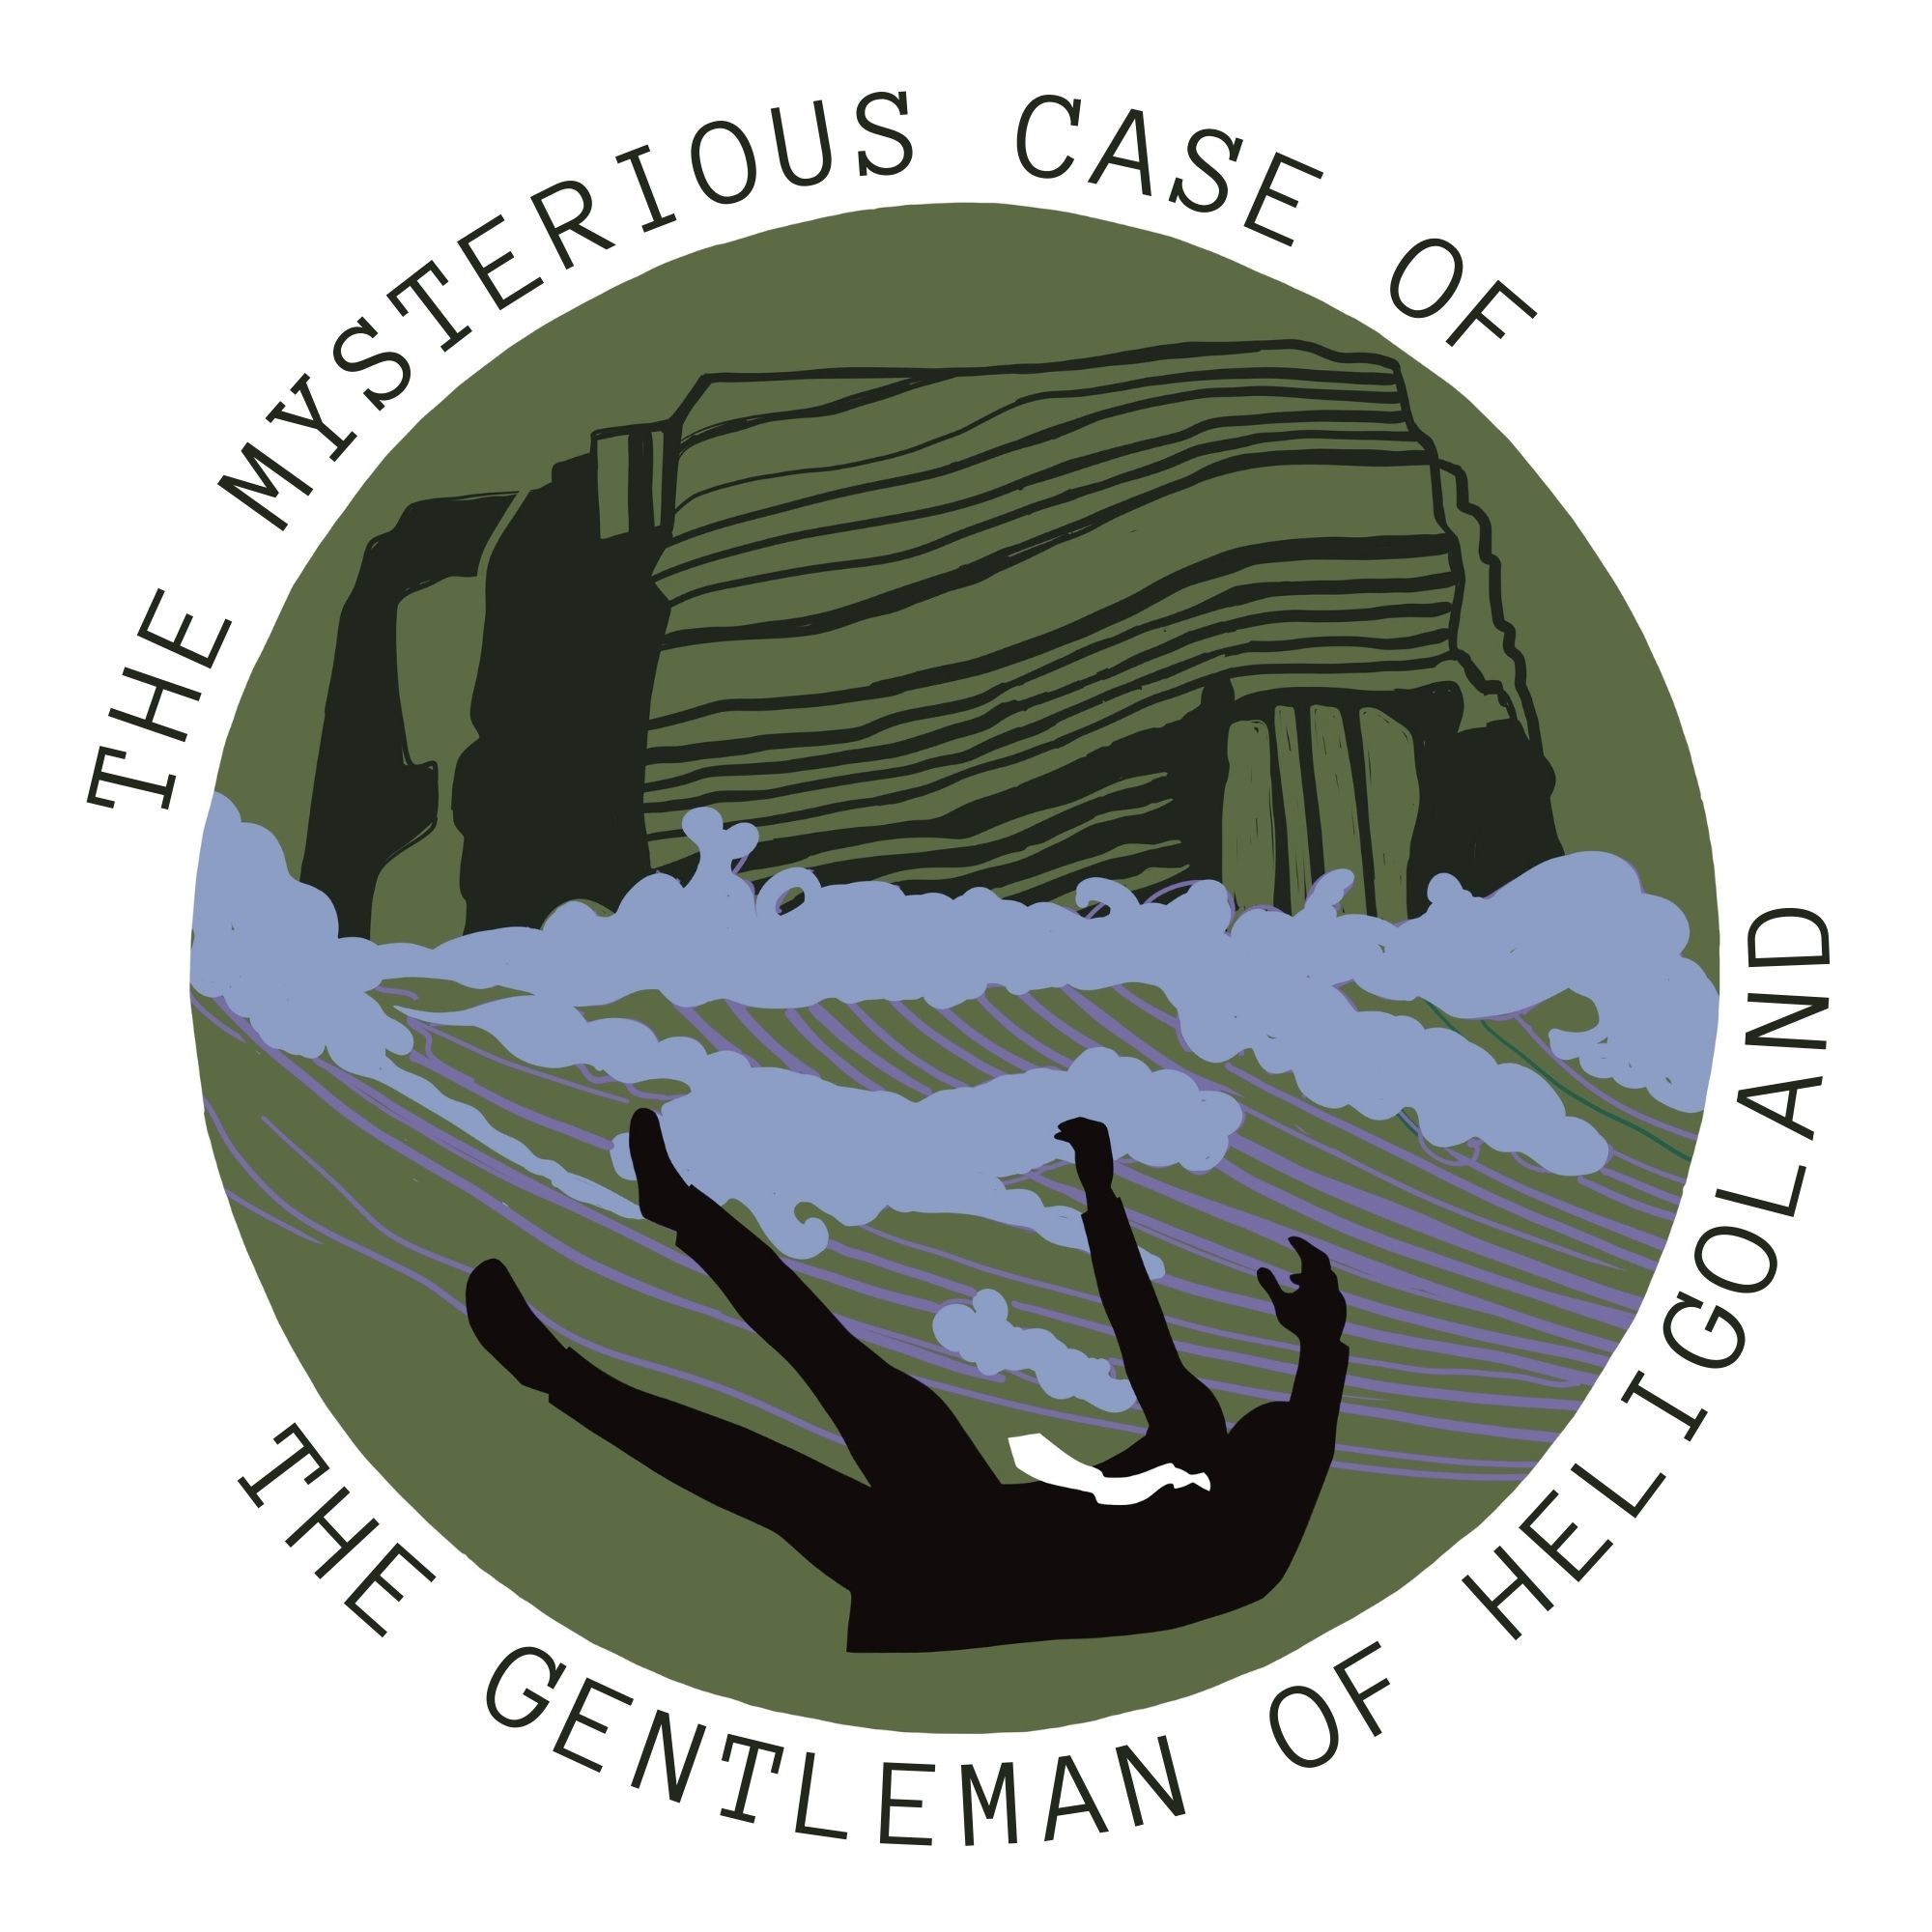 The Mysterious Case of the Gentleman of Heligoland